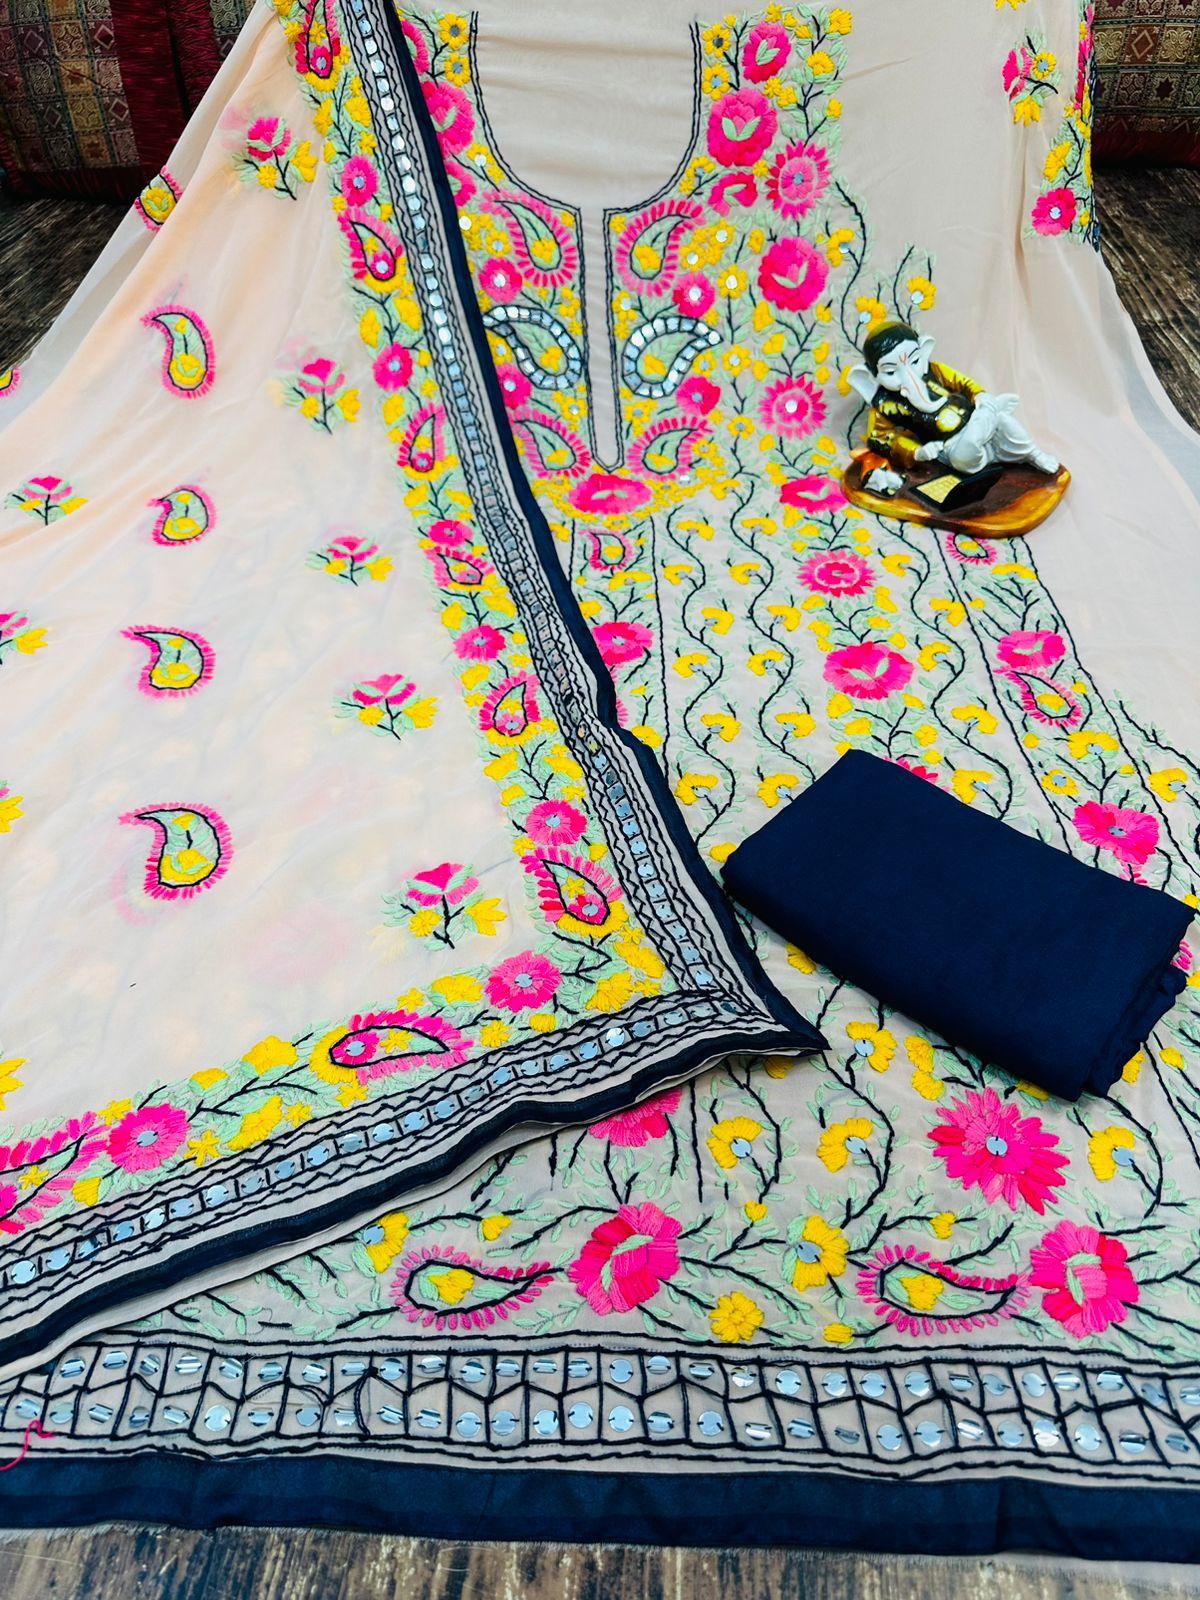 White Super Georgette Phulkari Suits with Beautiful Embroidery Shopping Online - Inayakhan Shop 